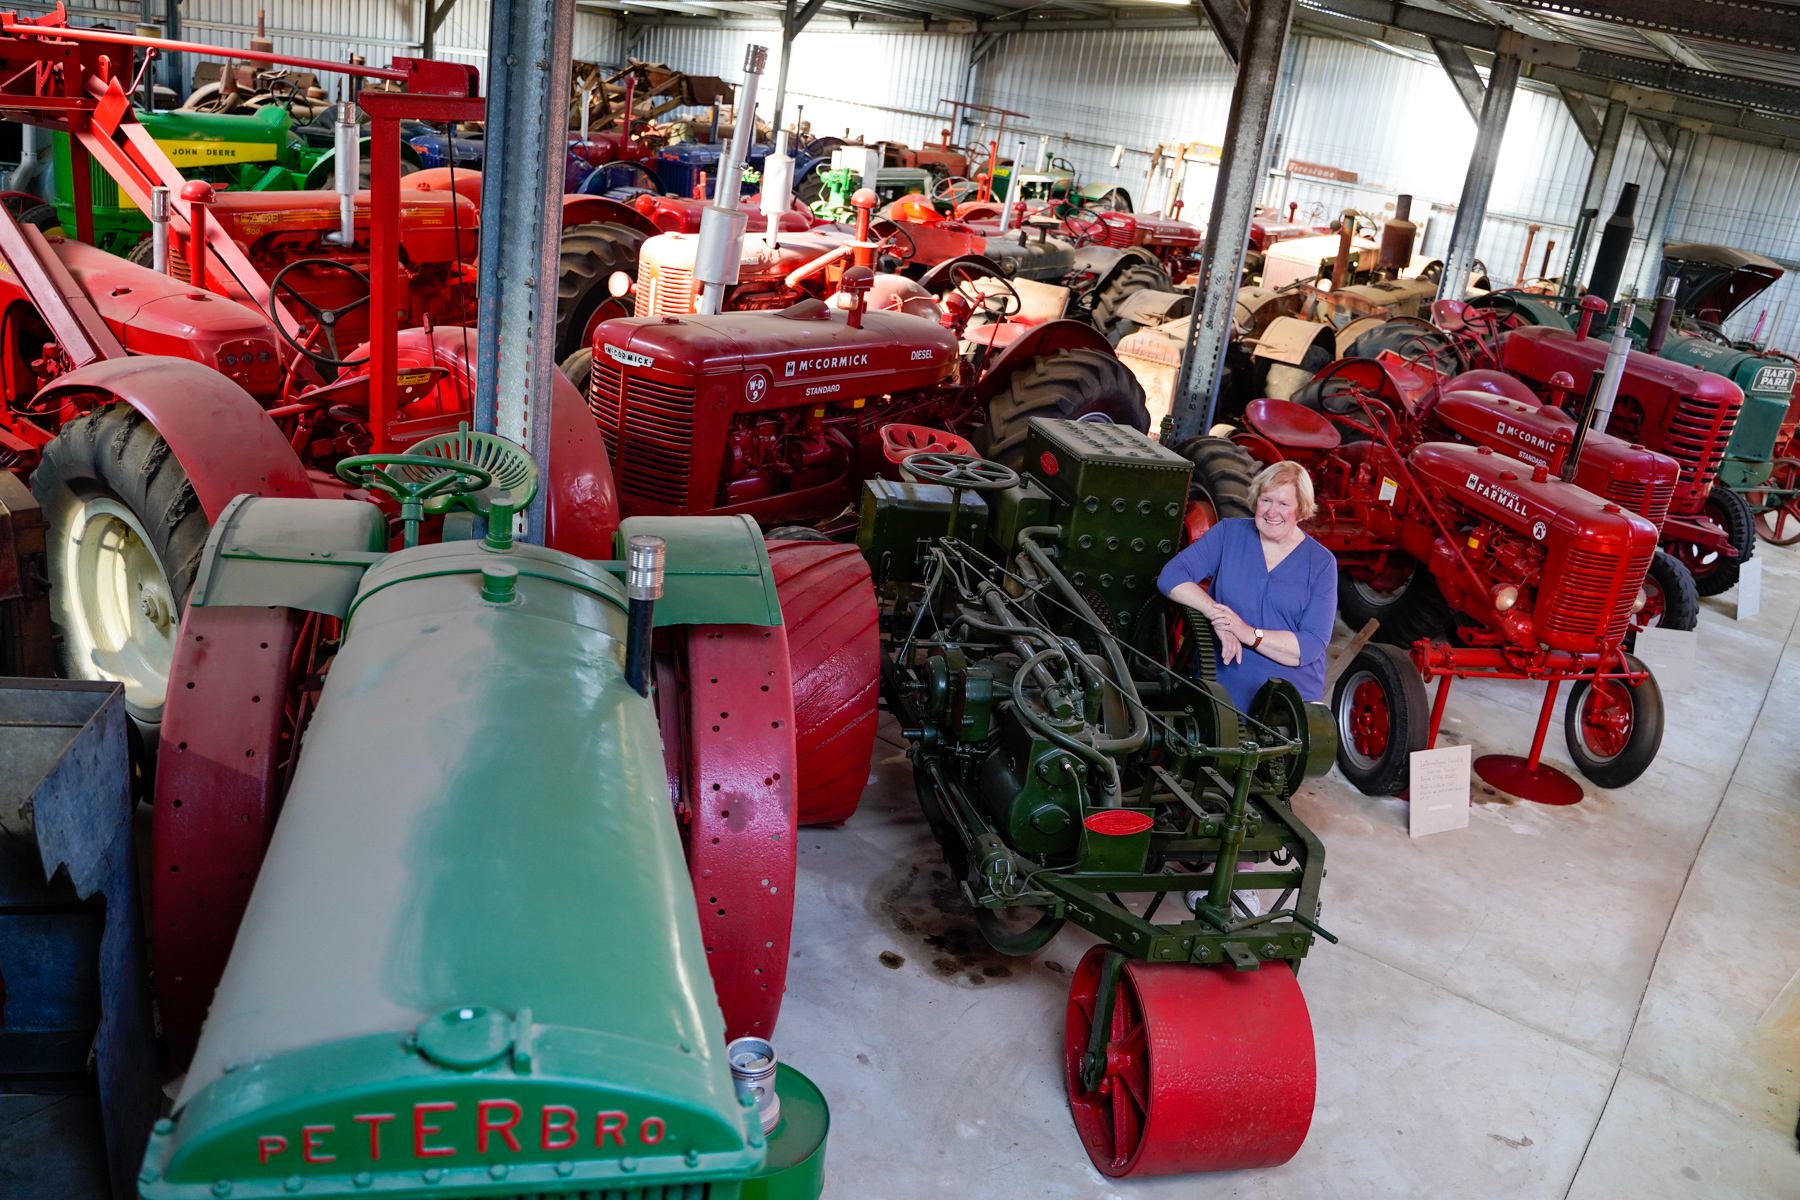 The John & Sue Illingworth Collection of Vintage Tractors & Machinery